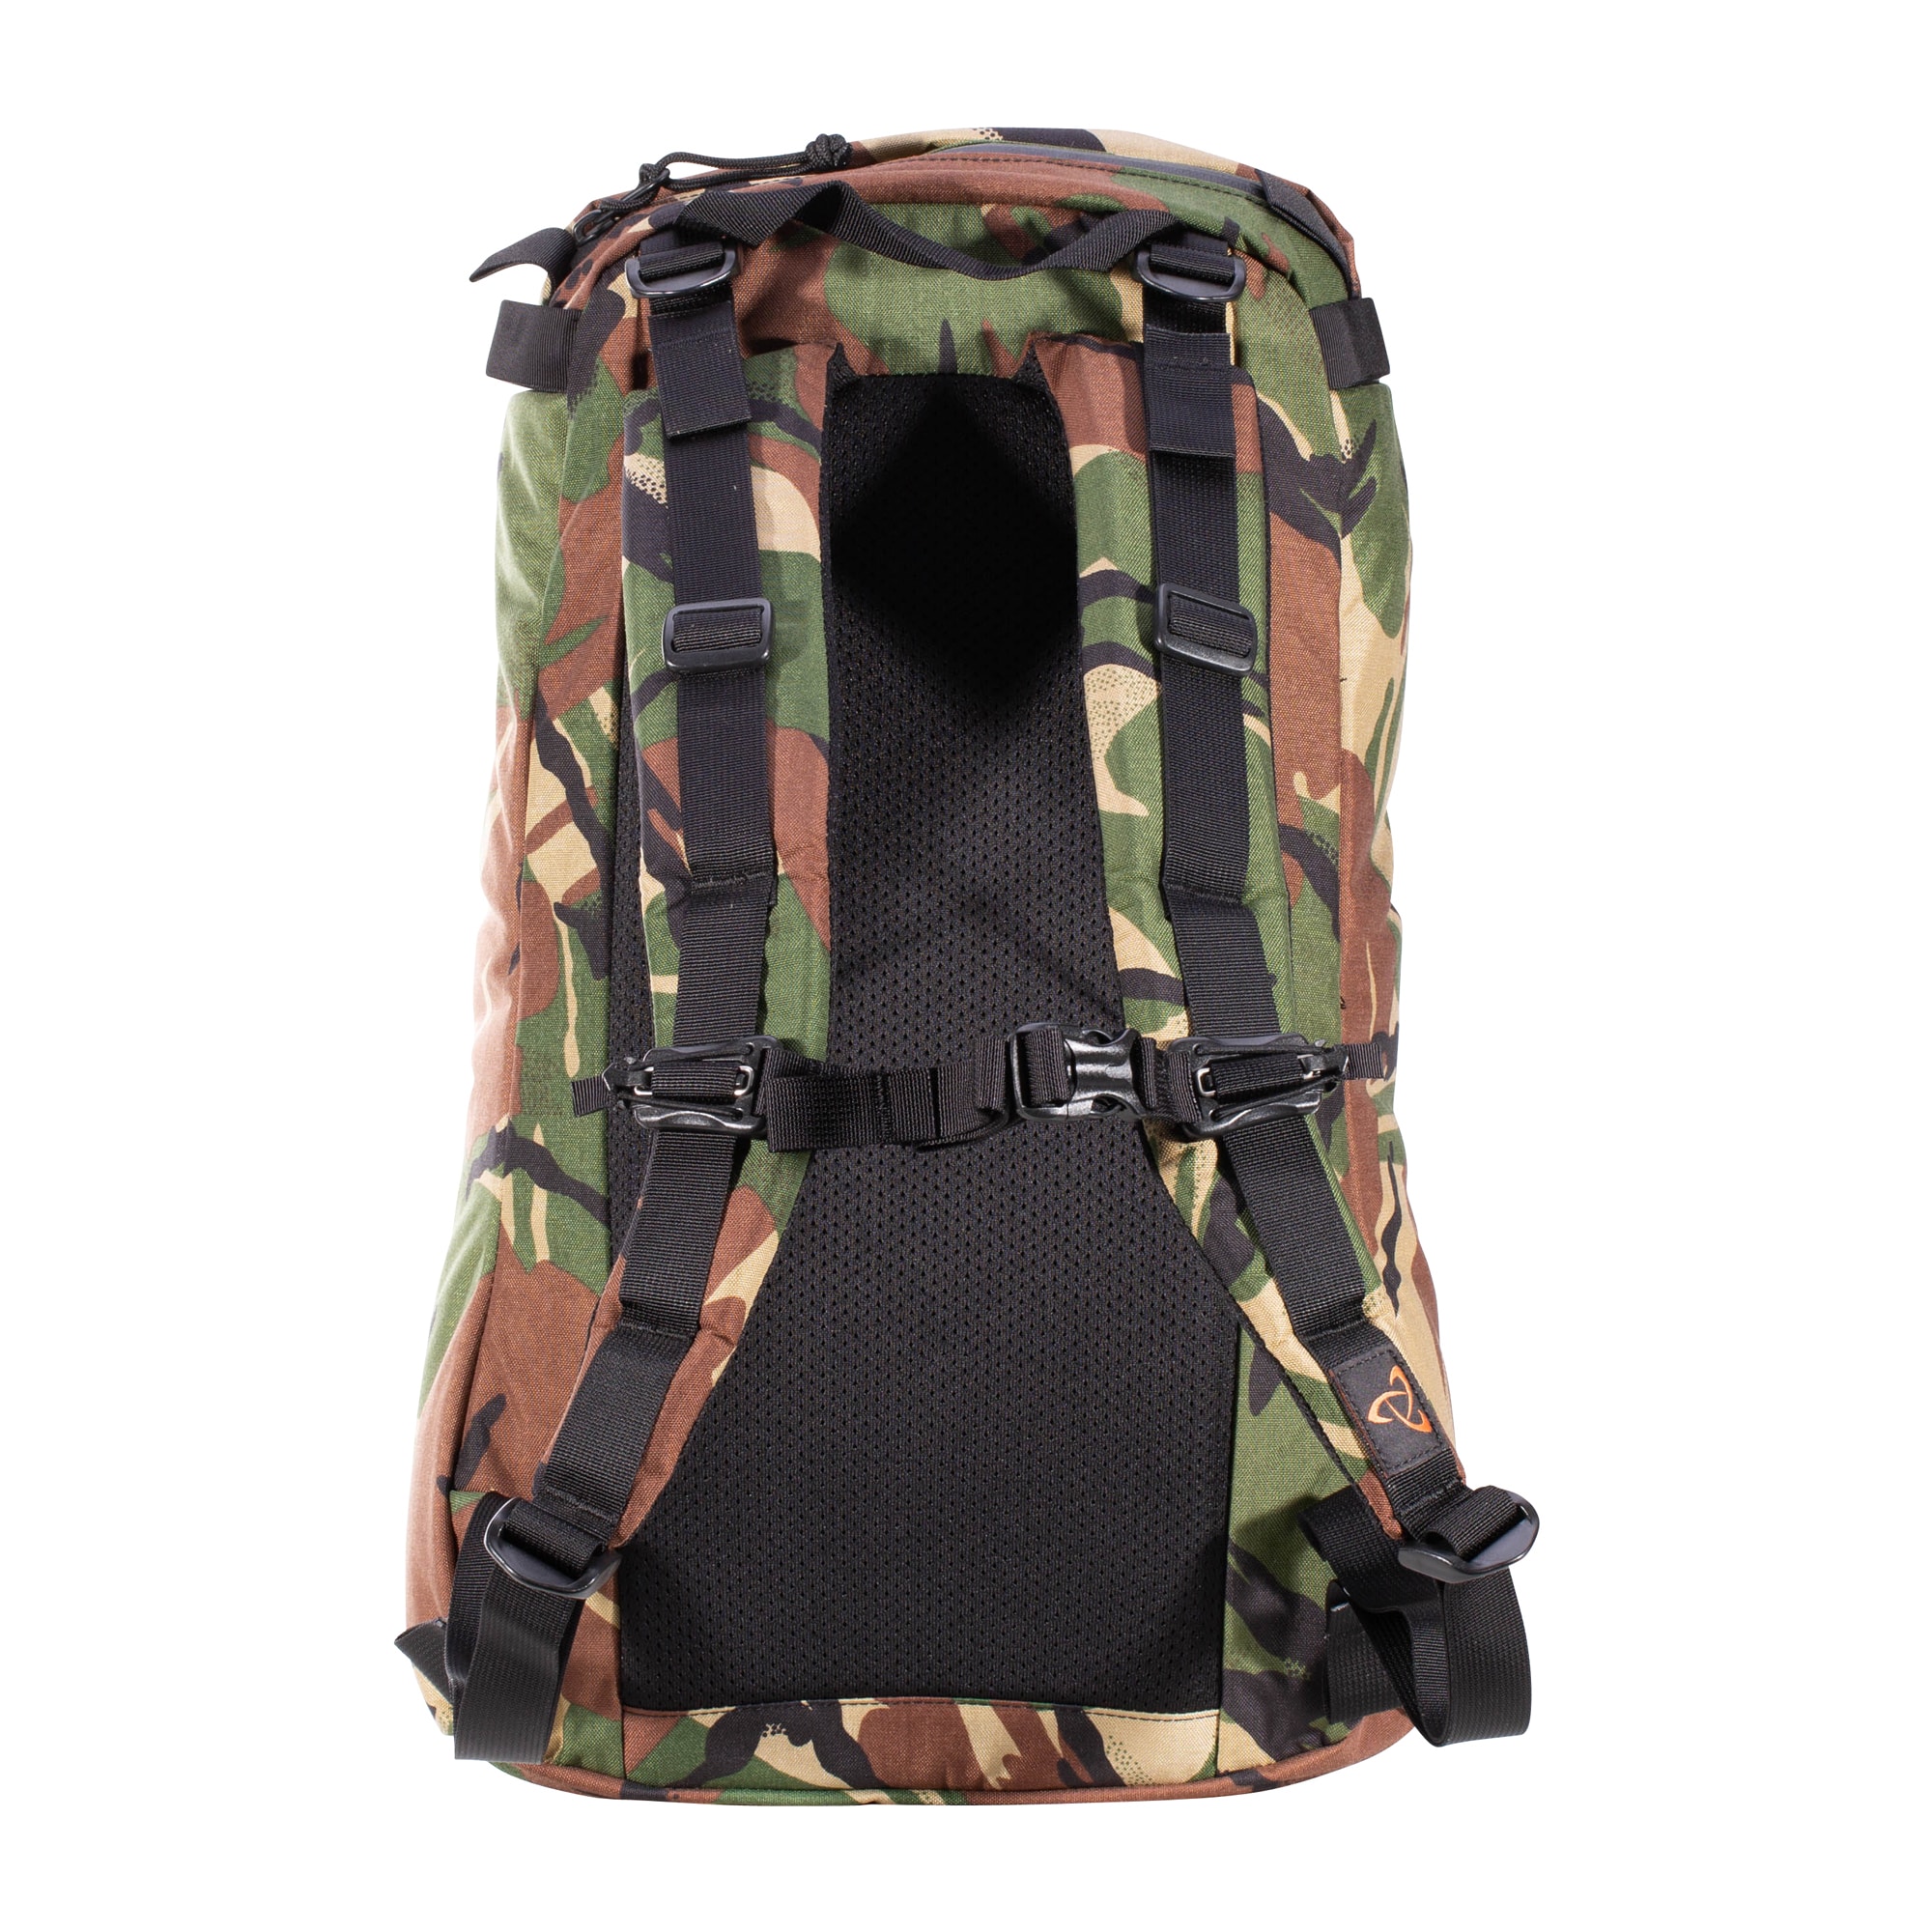 Mystery Ranch Indie Bag in DPM Camo